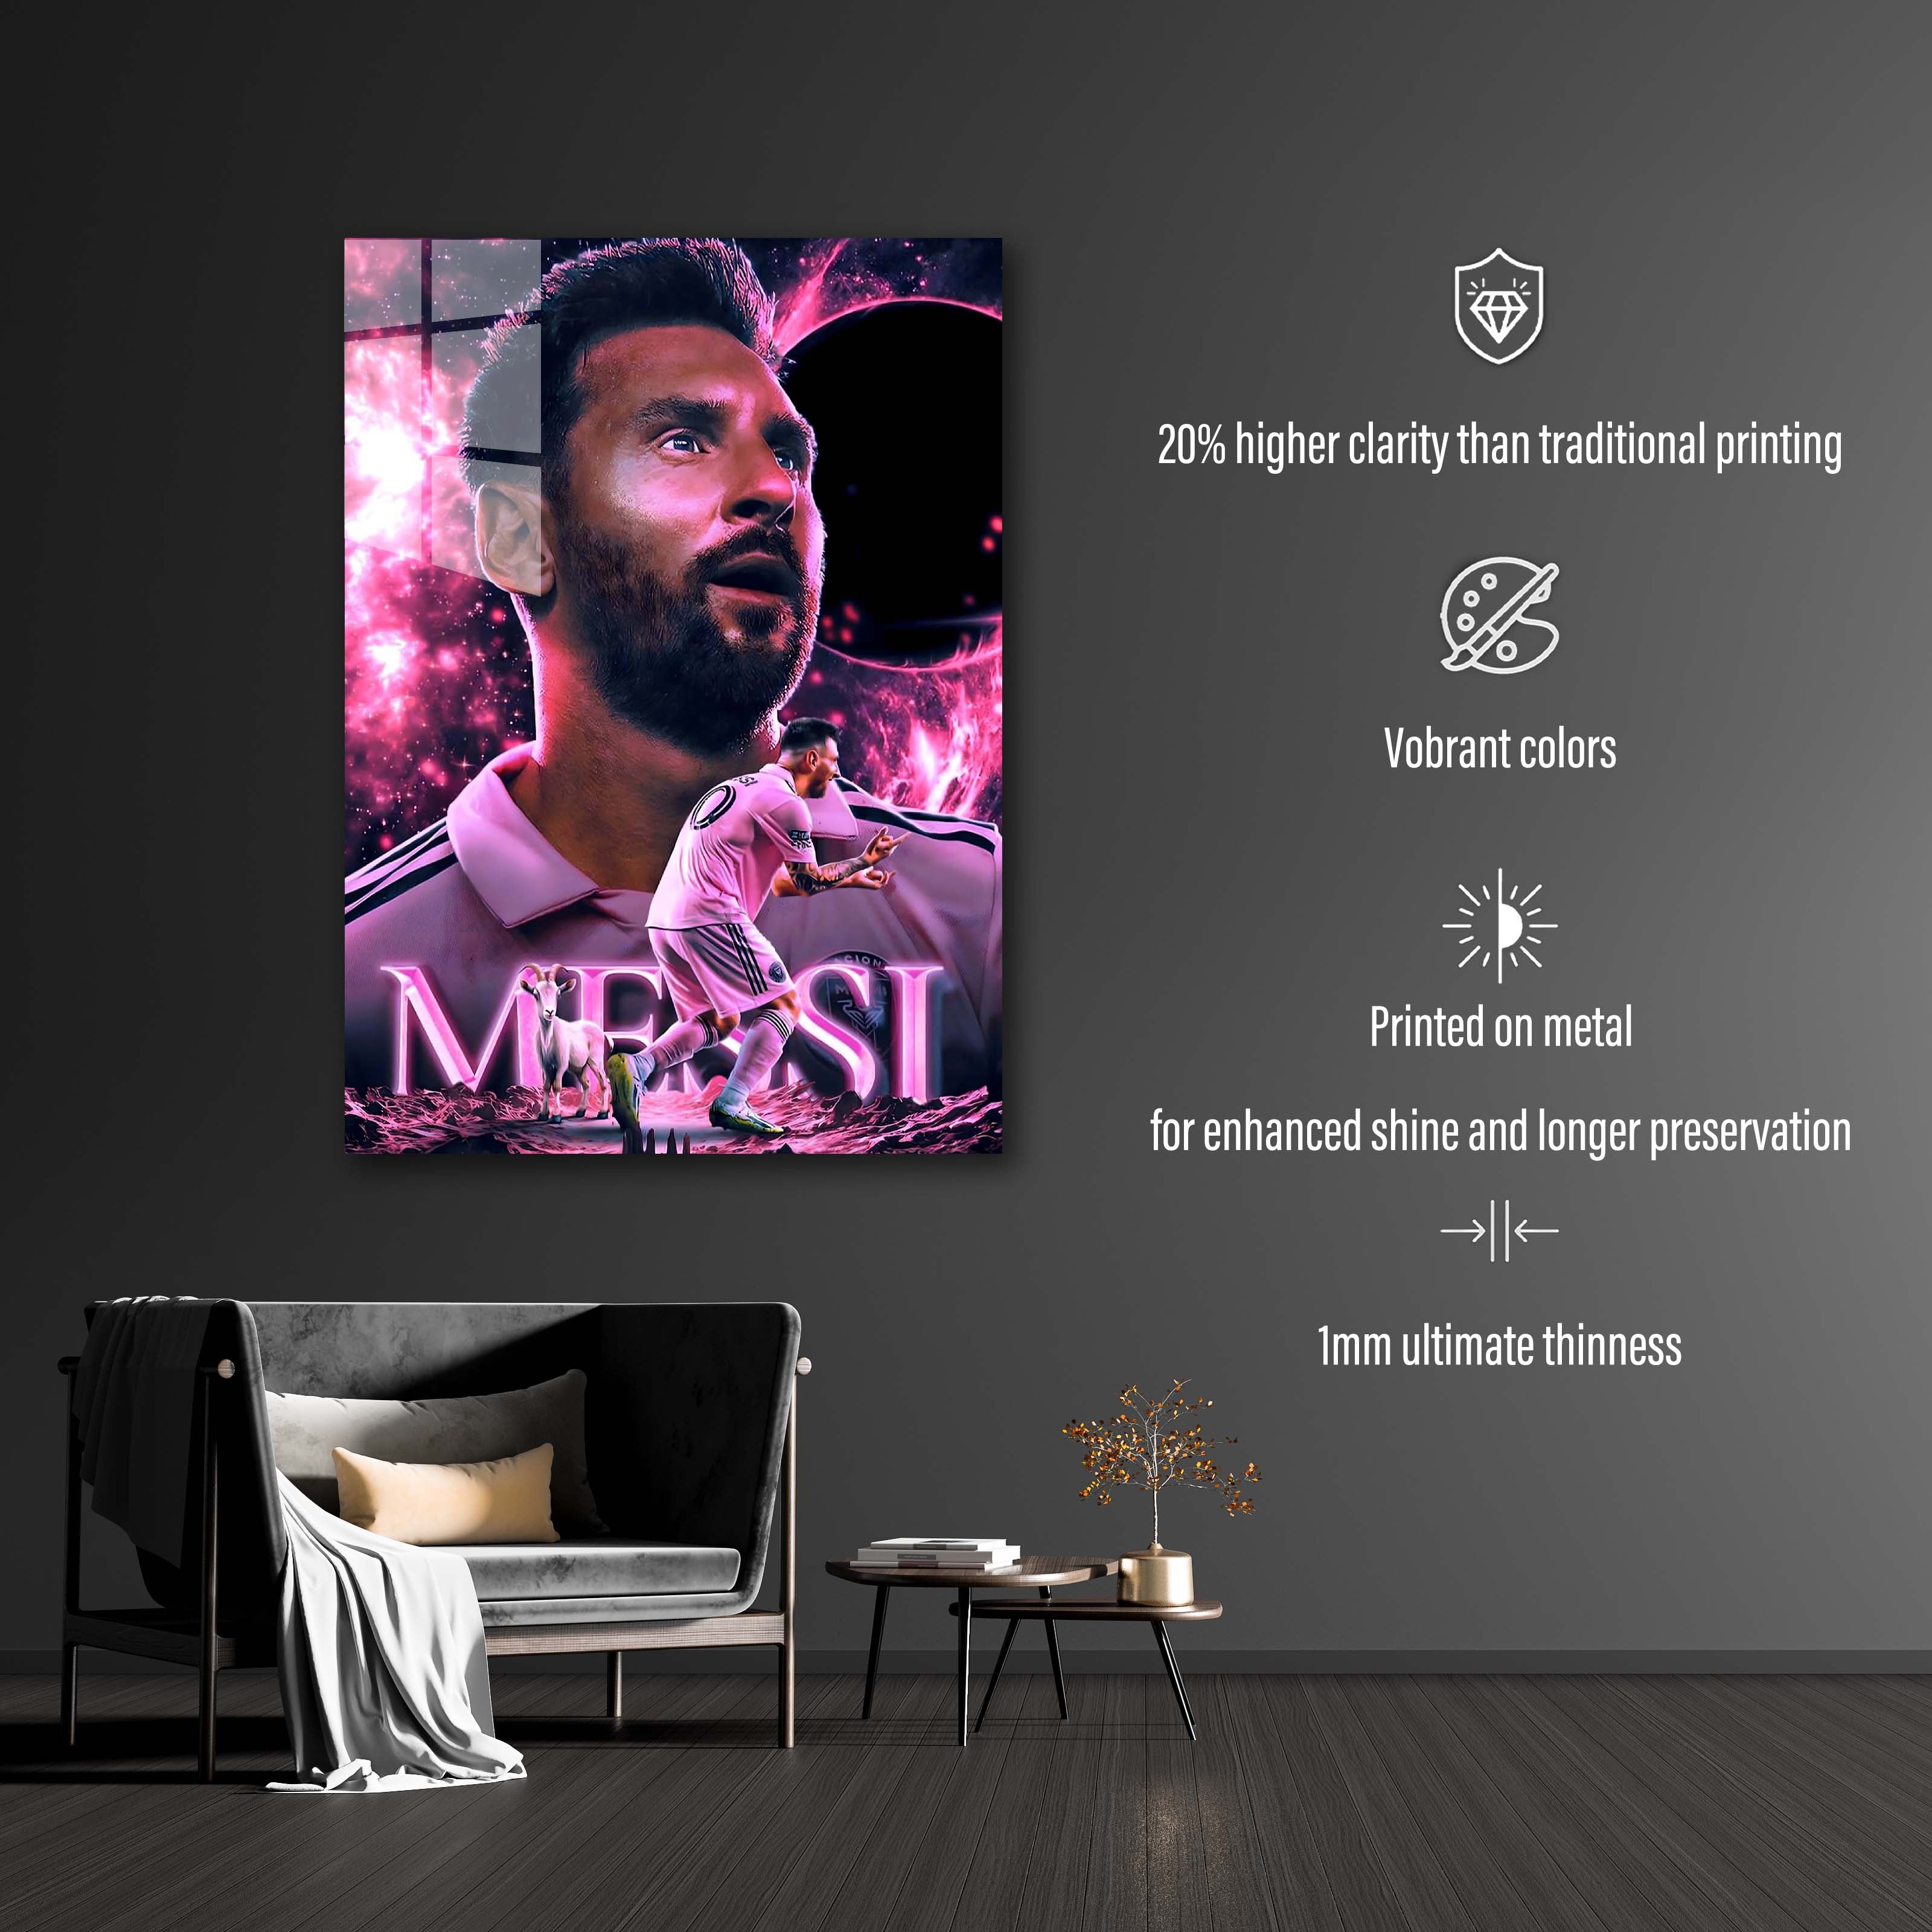 Messi Miami Pink-designed by @My Kido Art